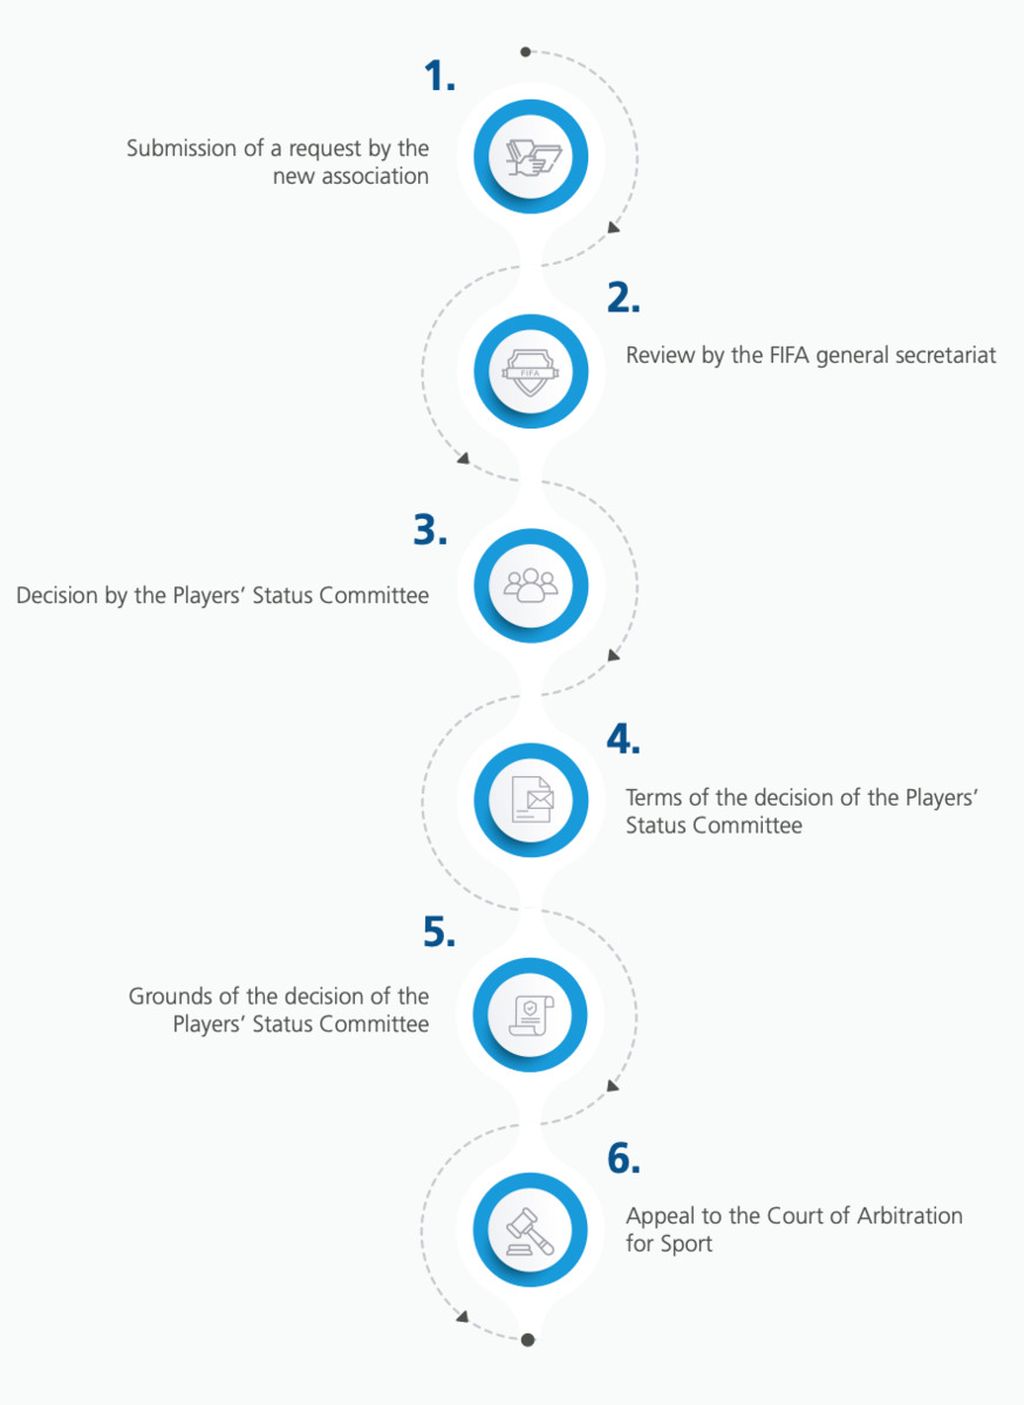 Flow of the process of transferring naturalized player associations to FIFA.